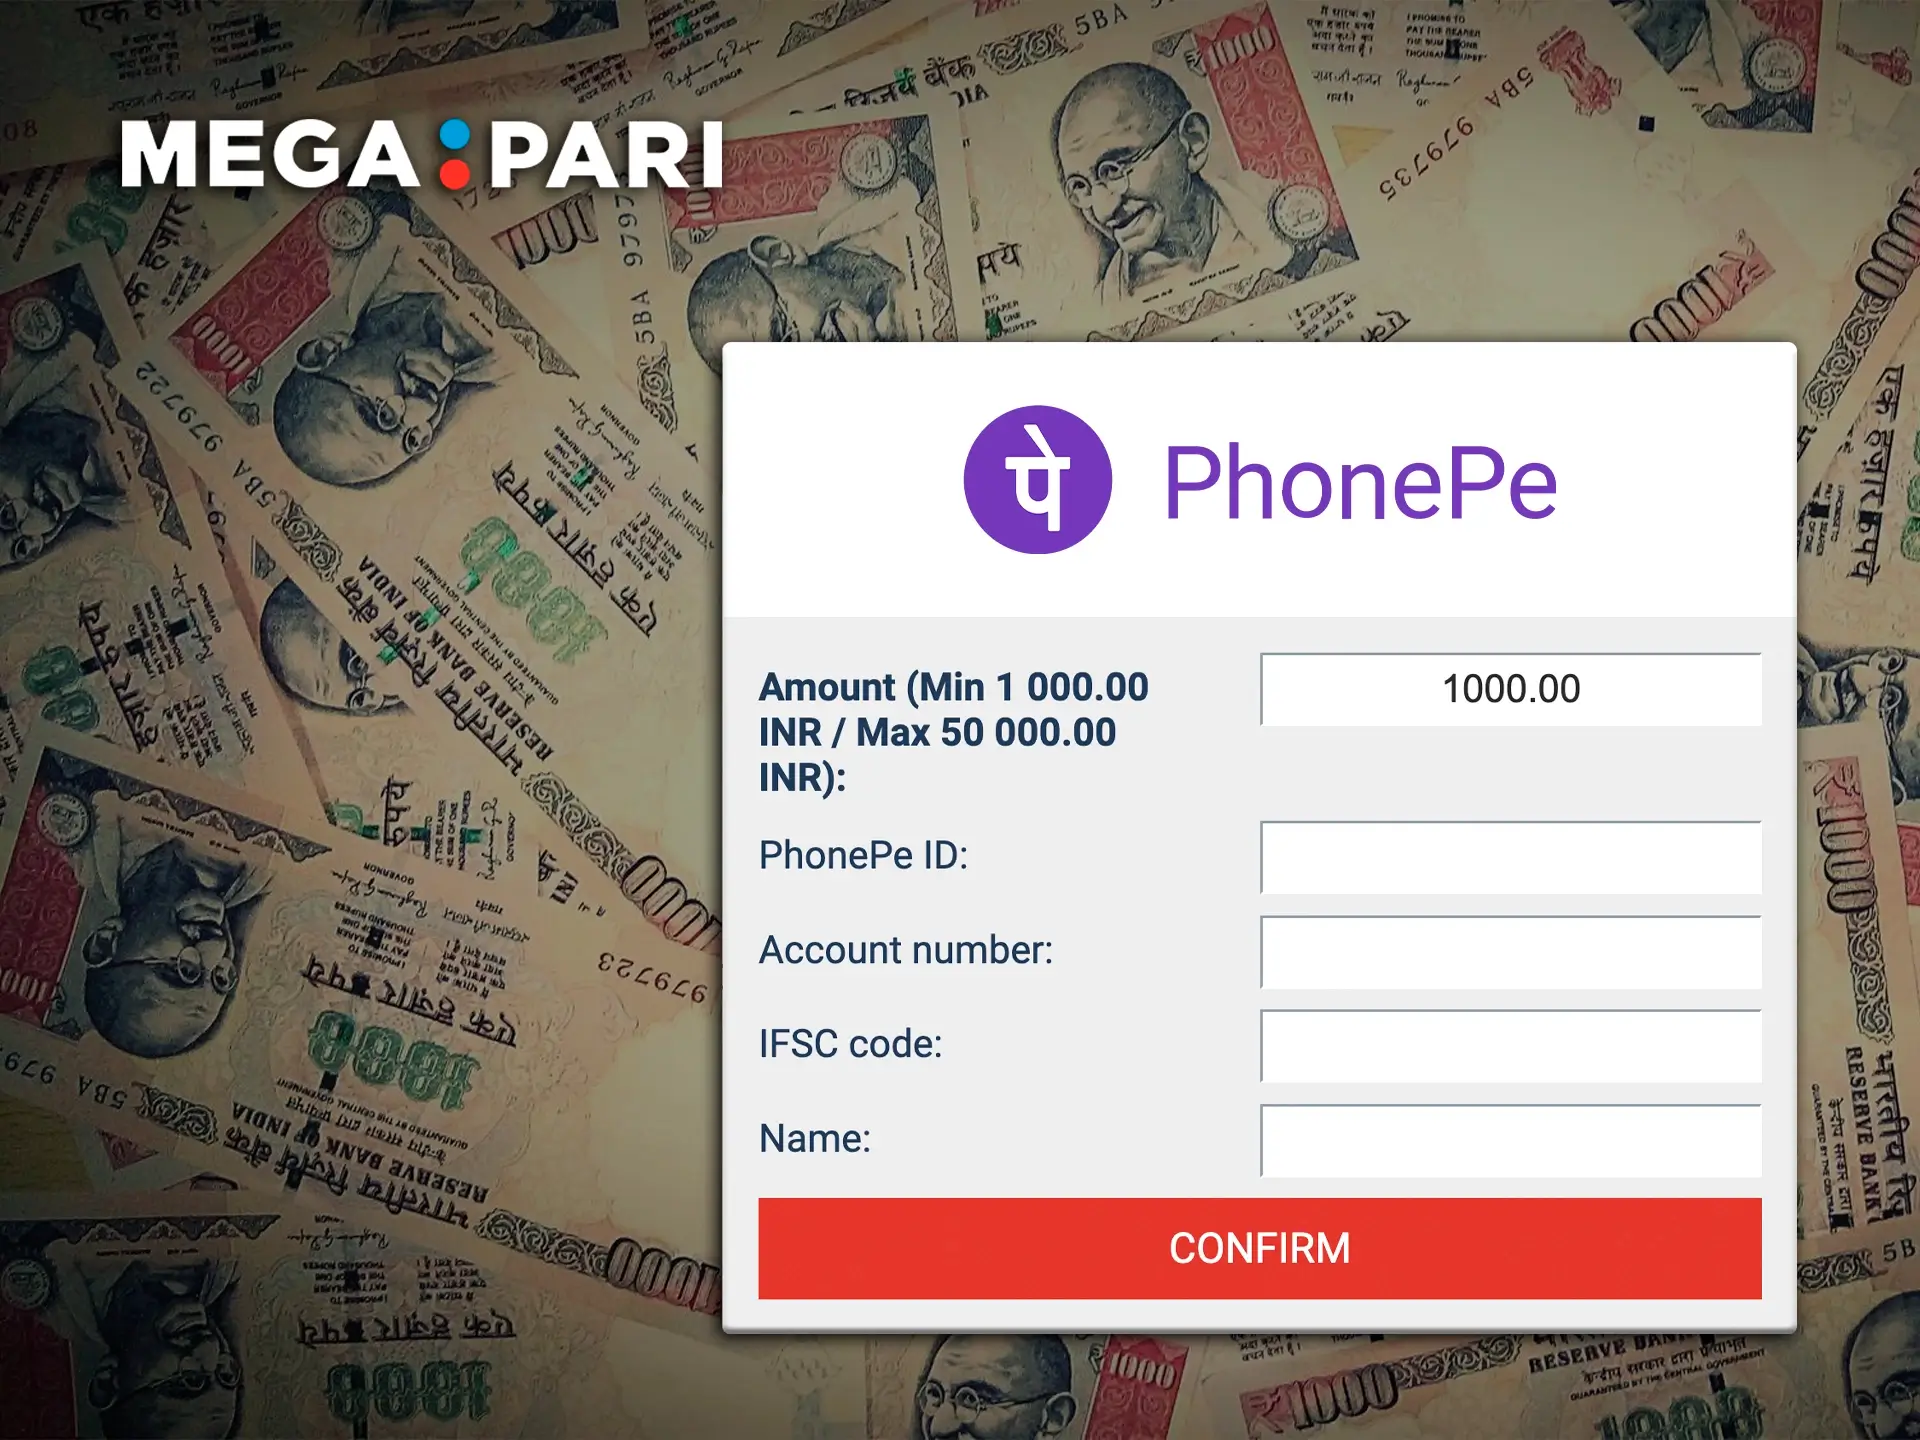 A particularly popular option for Megapari users is to withdraw funds via the PhonePe platform.